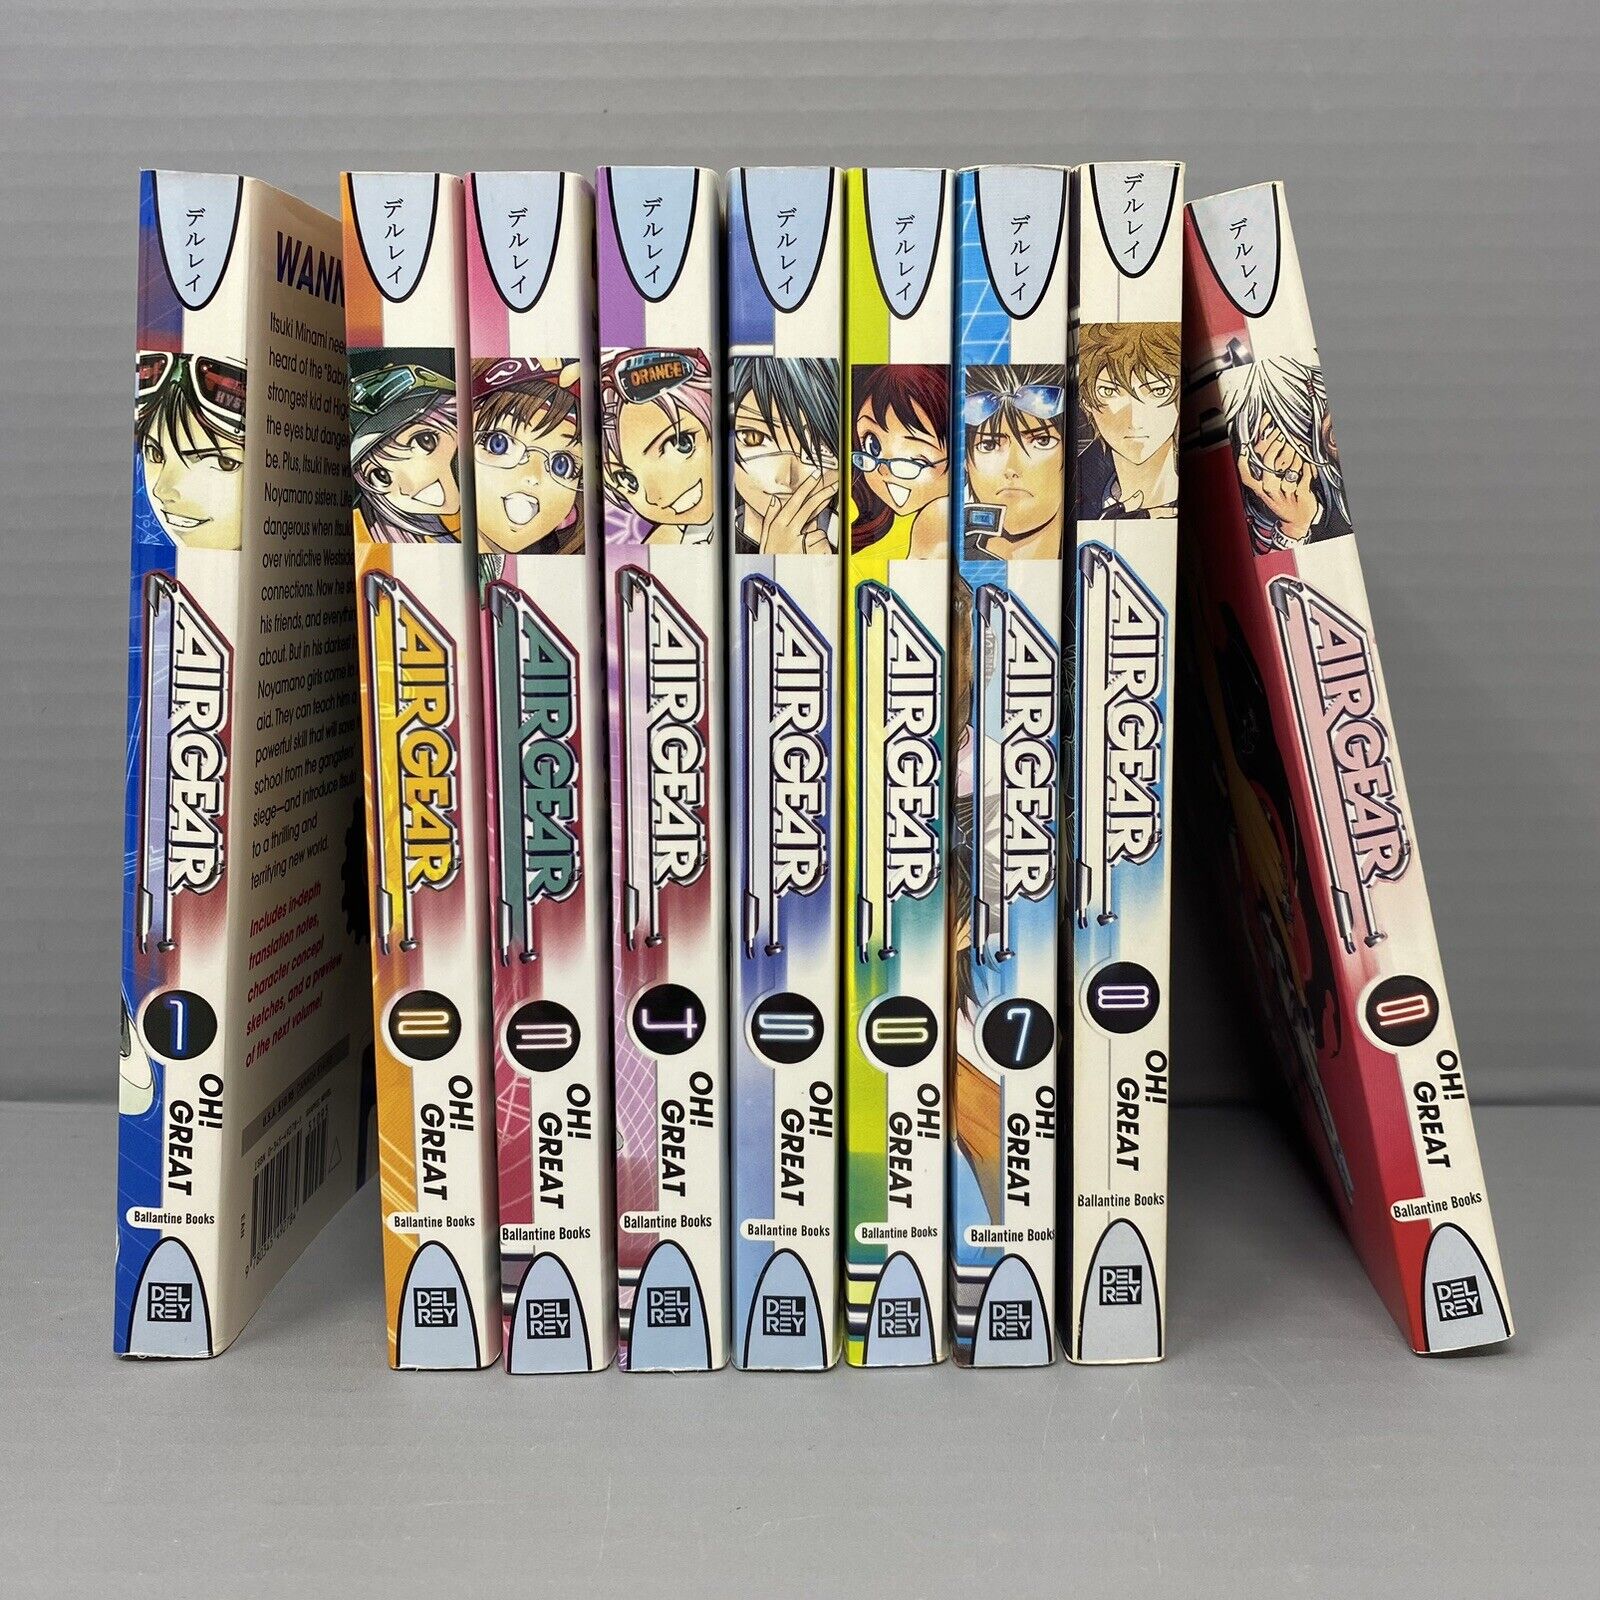 Air Gear By Oh Great Manga Graphic Novel Book Lot Vol 1-9 Del Rey English